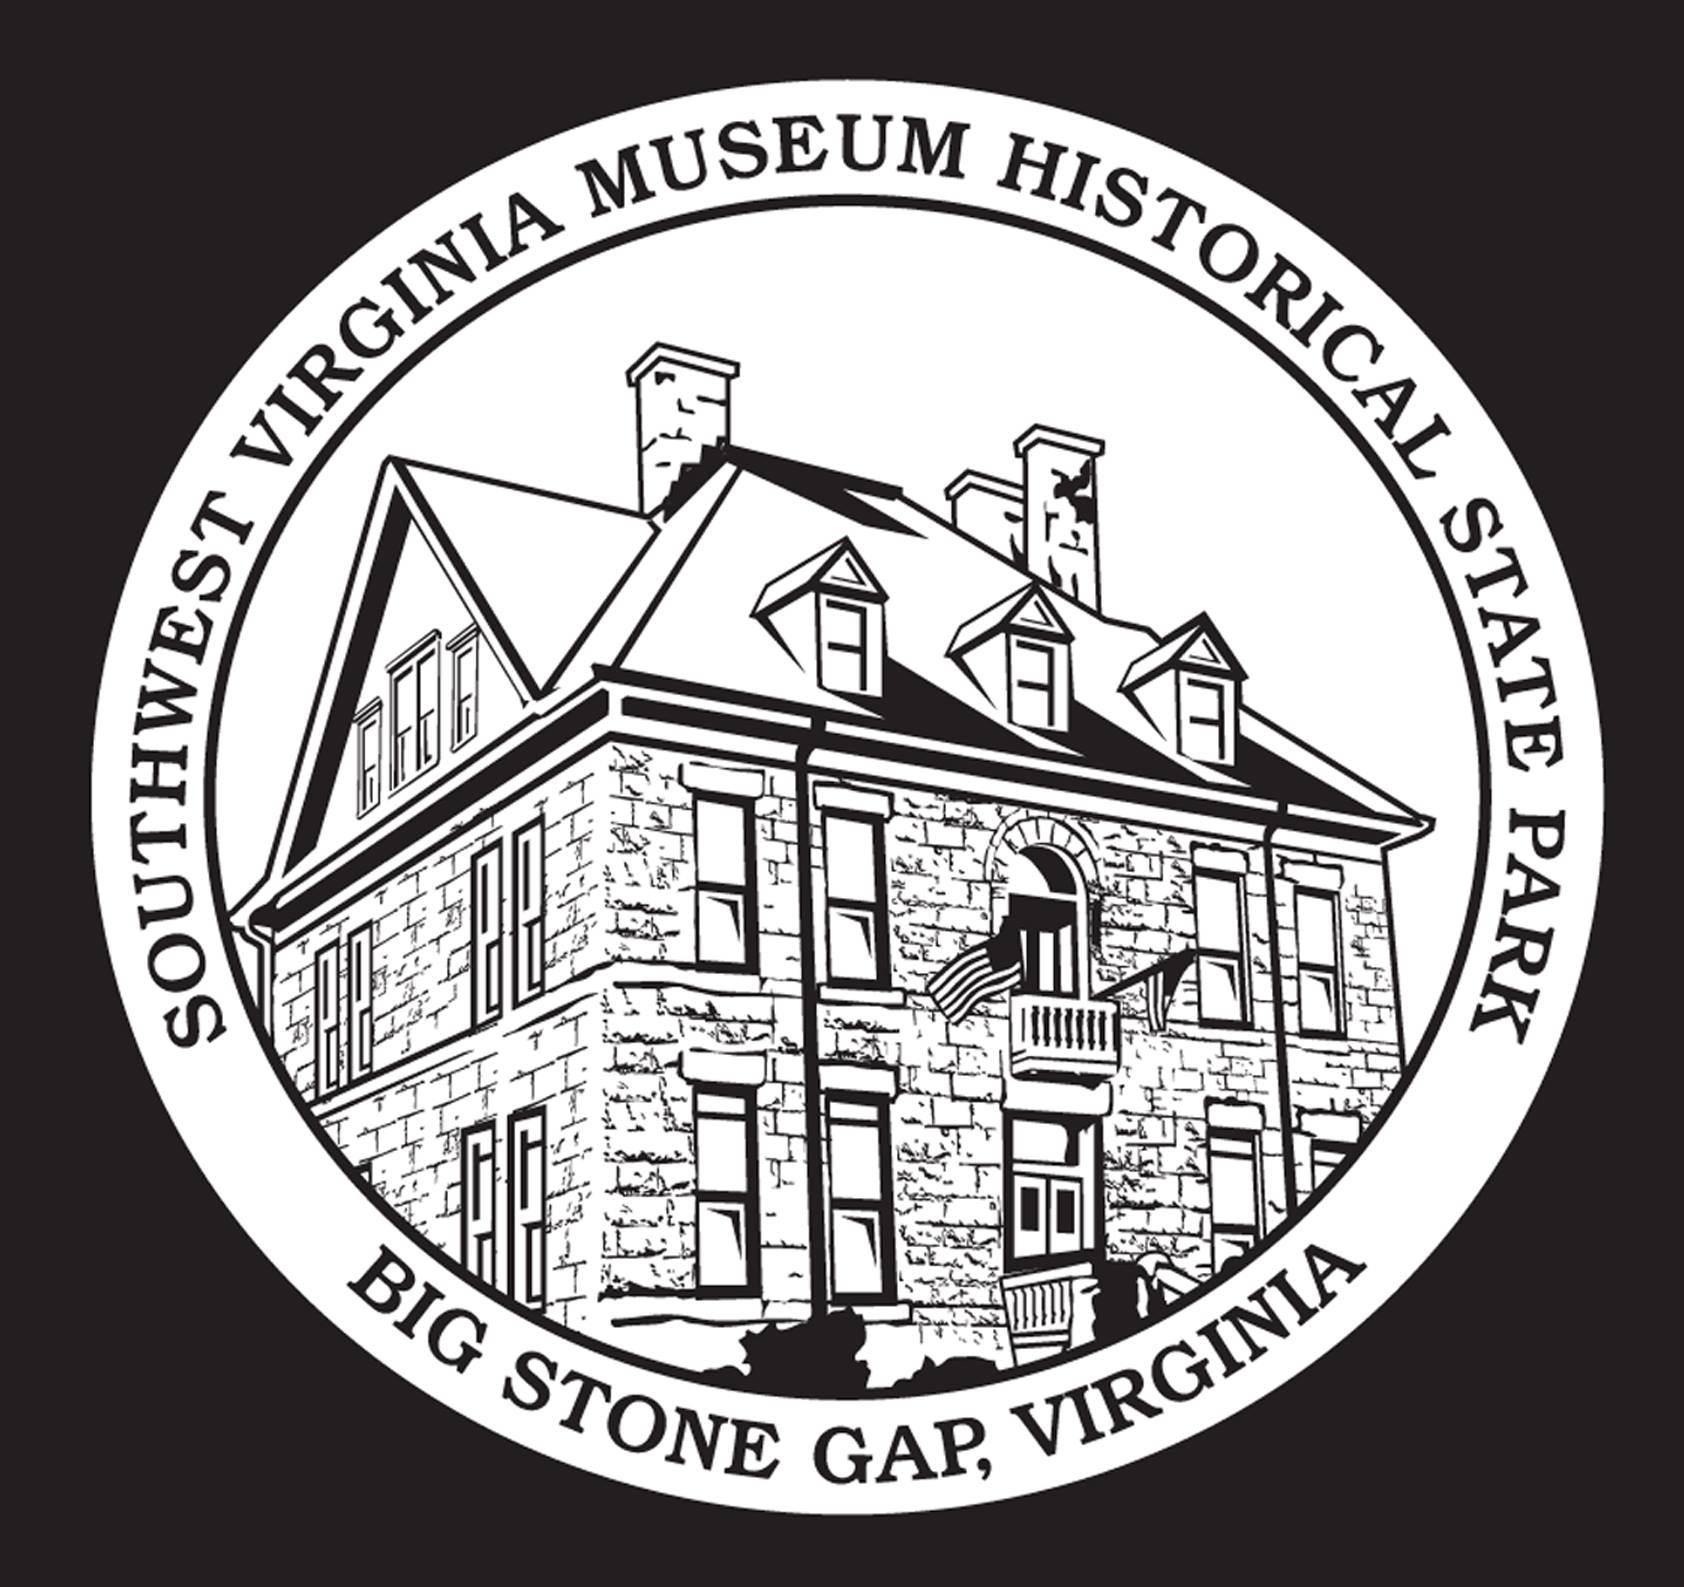 Friends of the Southwest Virginia Museum